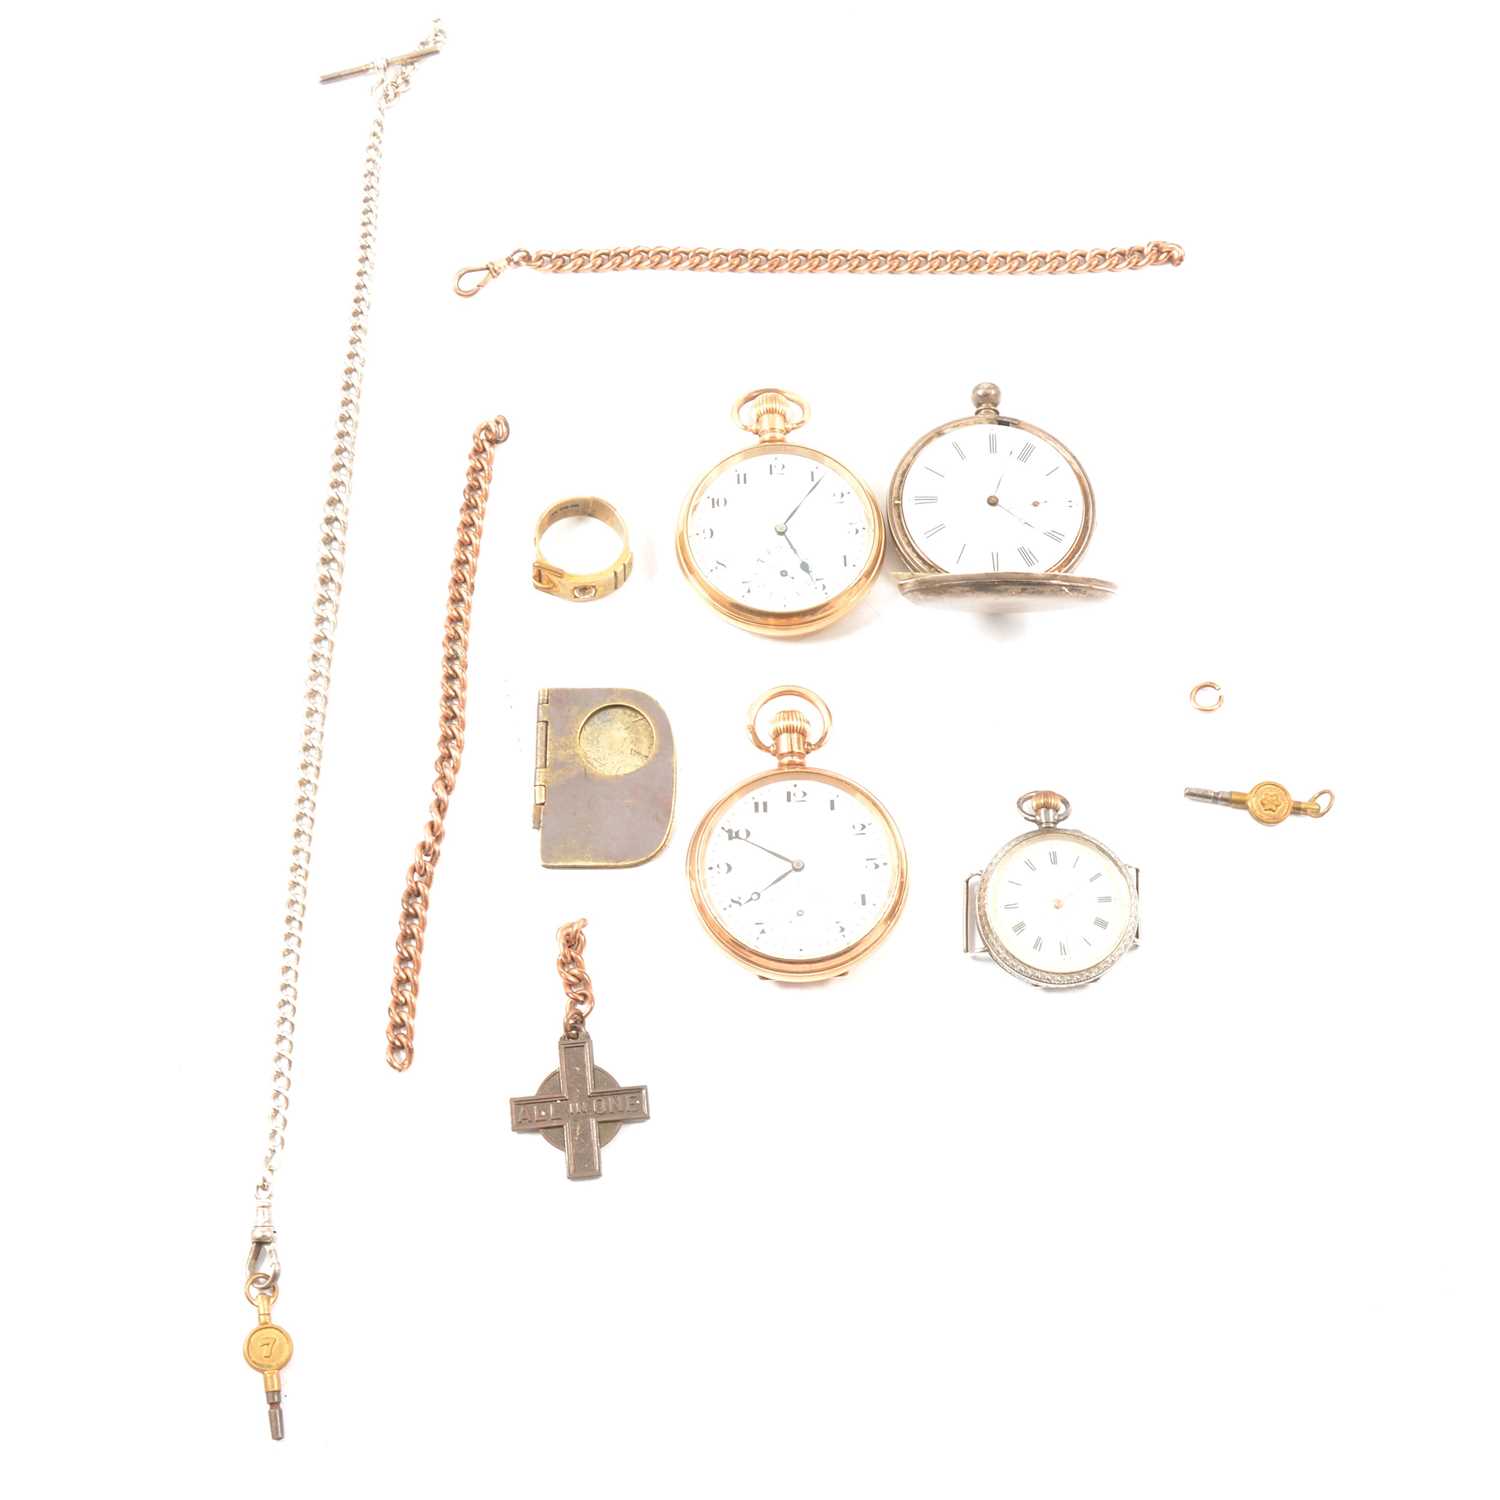 Lot 286 - Gold-plated, silver and base metal pocket watches and Albert chains, brass pocket sundial.